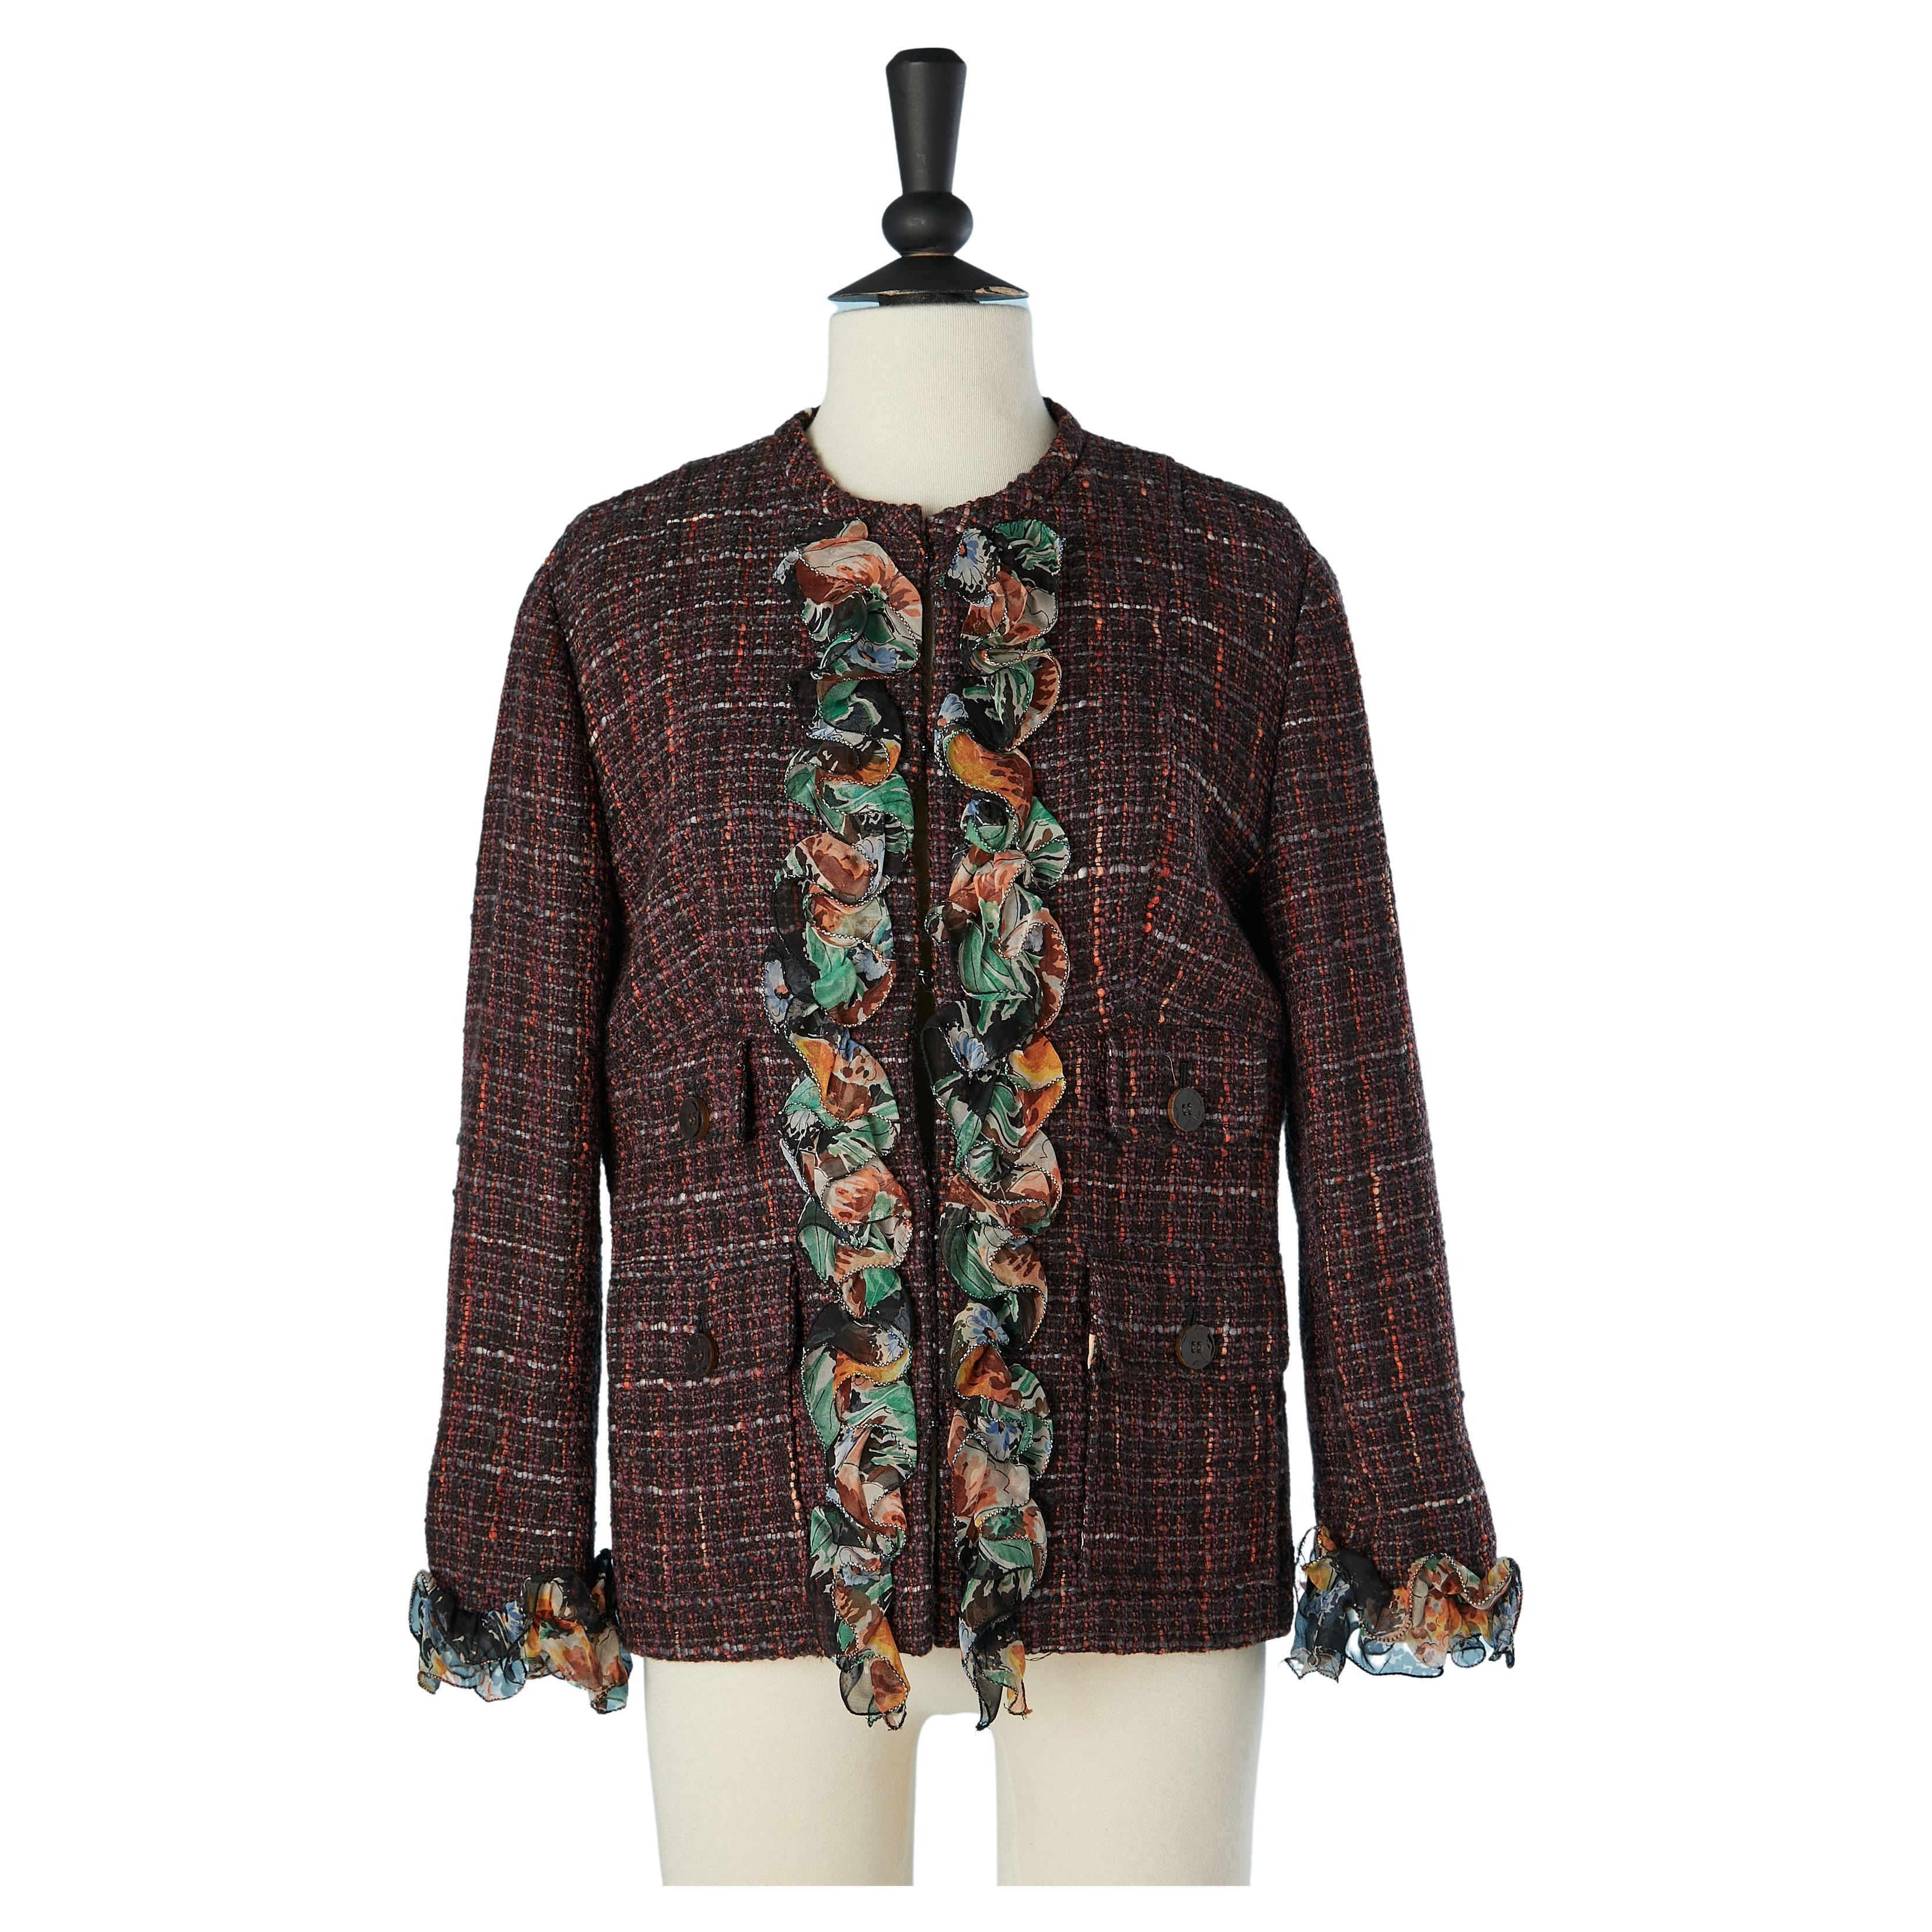 Edge to edge tweed jacket with flower printed chiffon ruffles Dolce & Gabbana  For Sale